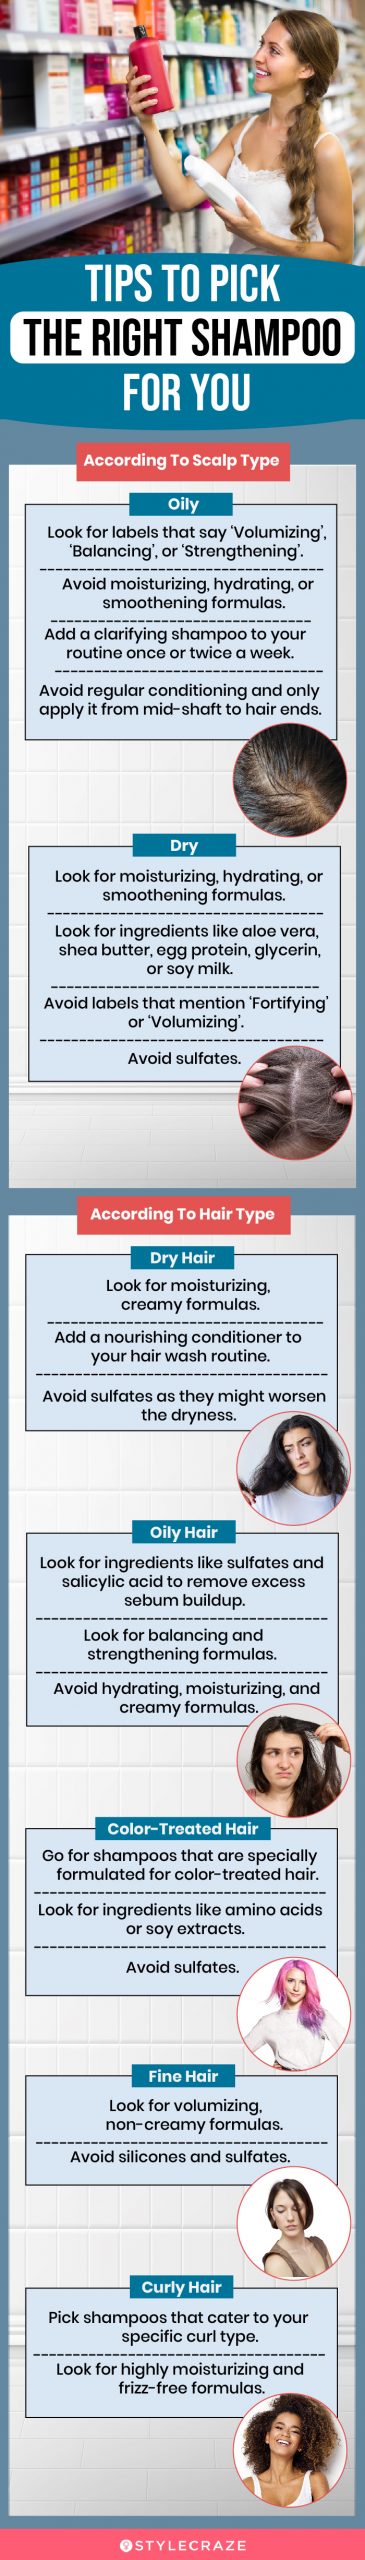 tips to pick the right shampoo for you (infographic)